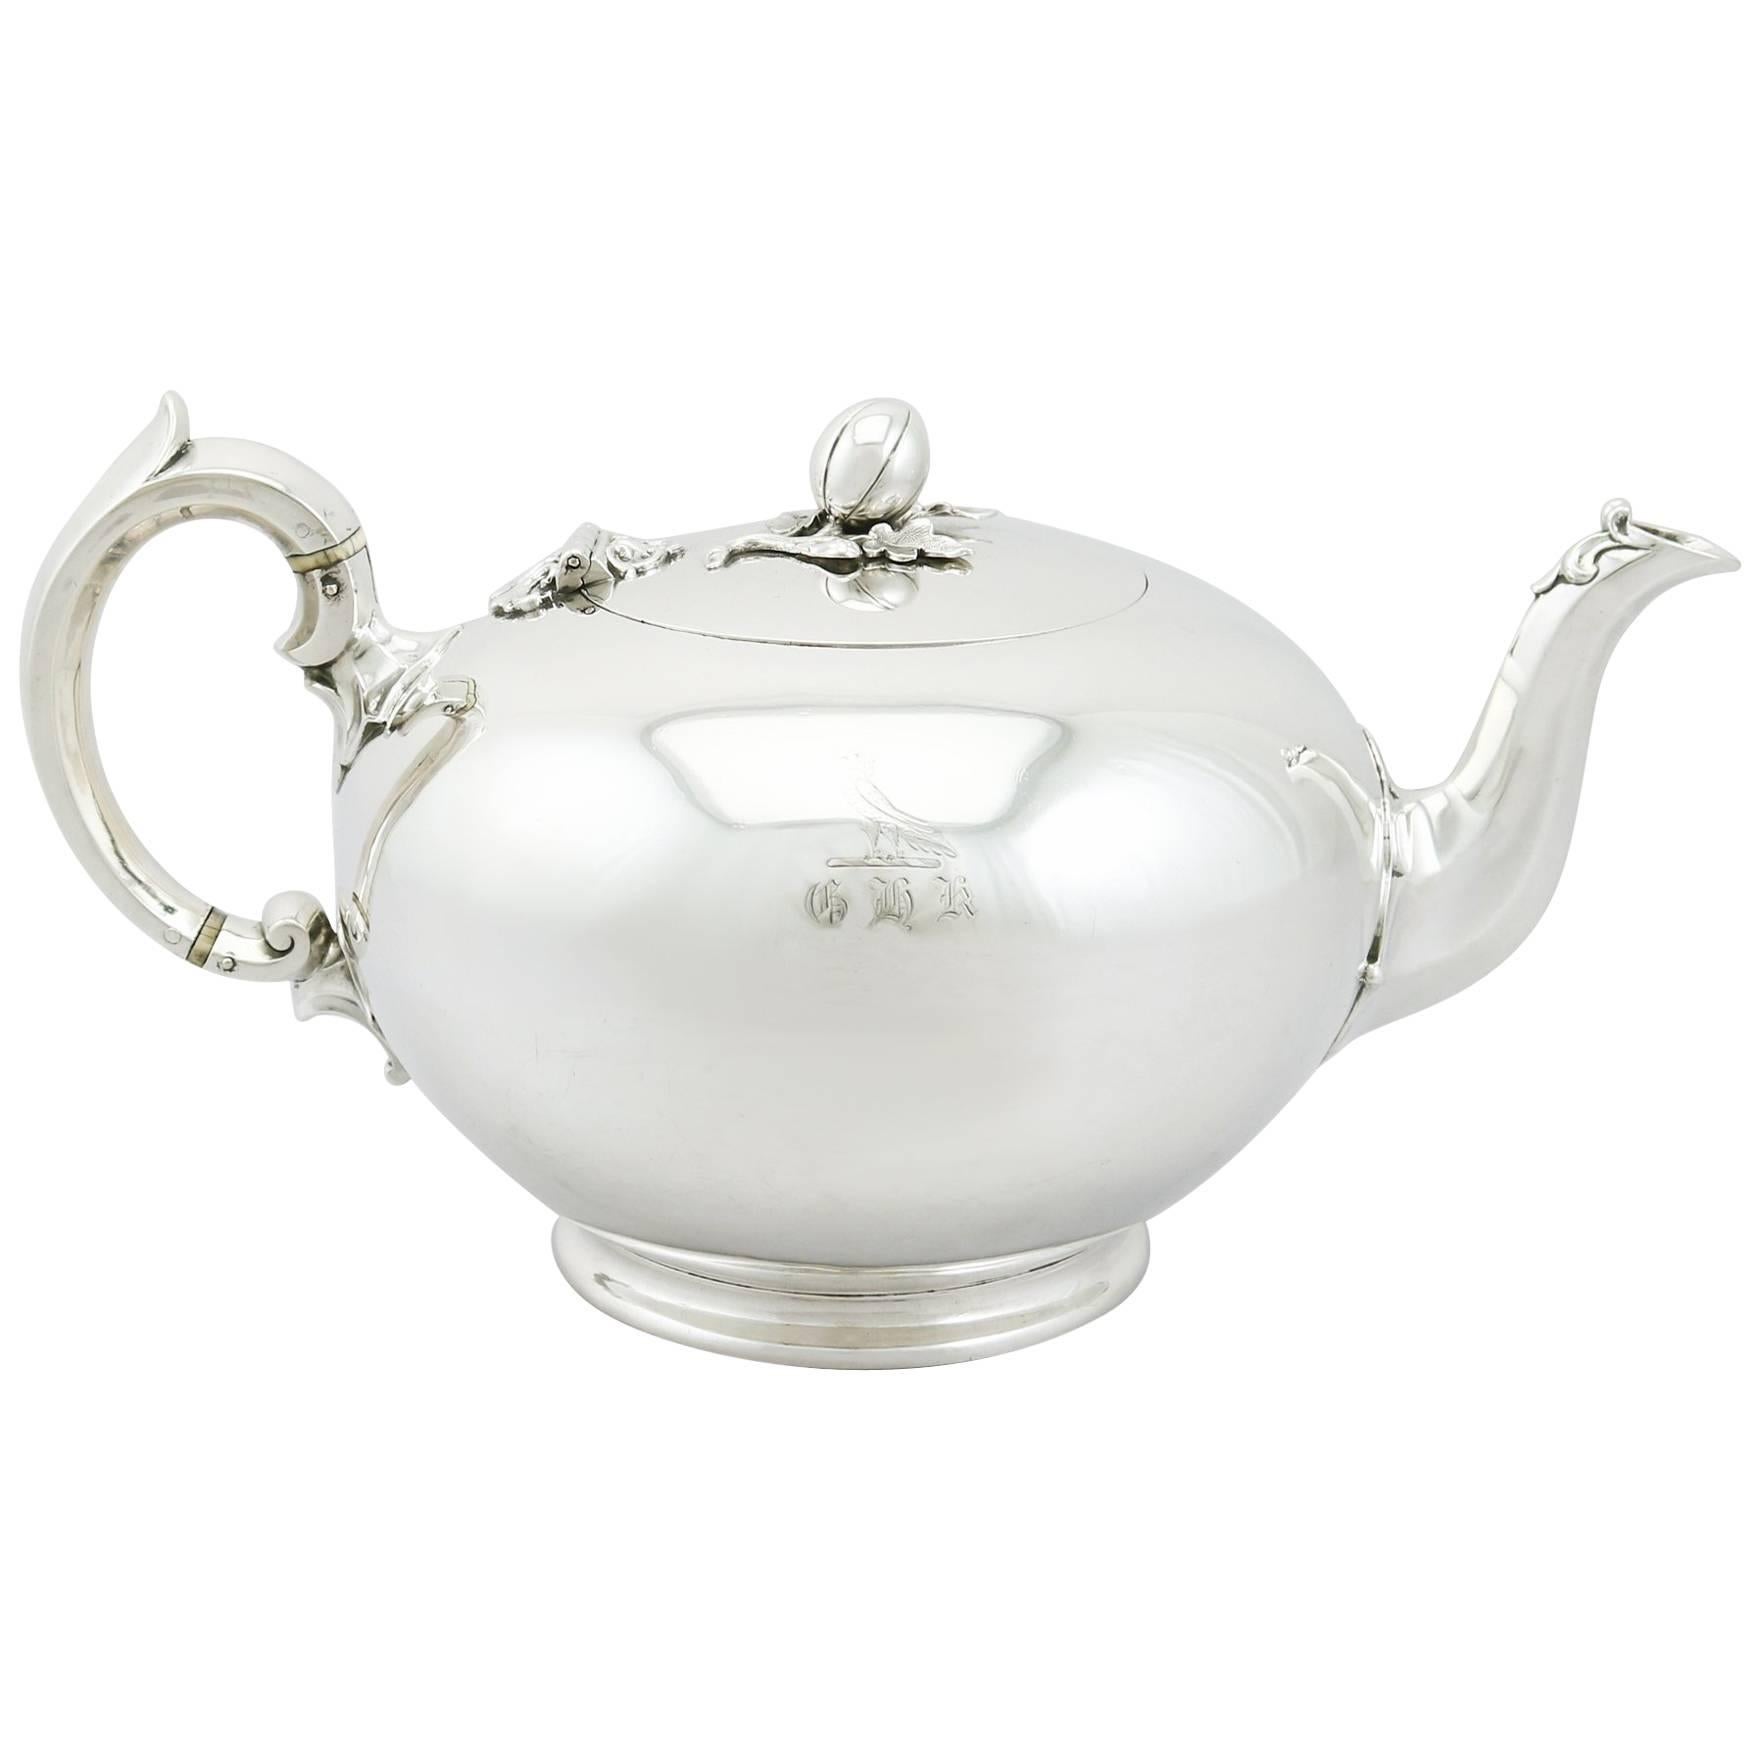 1840s Victorian Sterling Silver Teapot